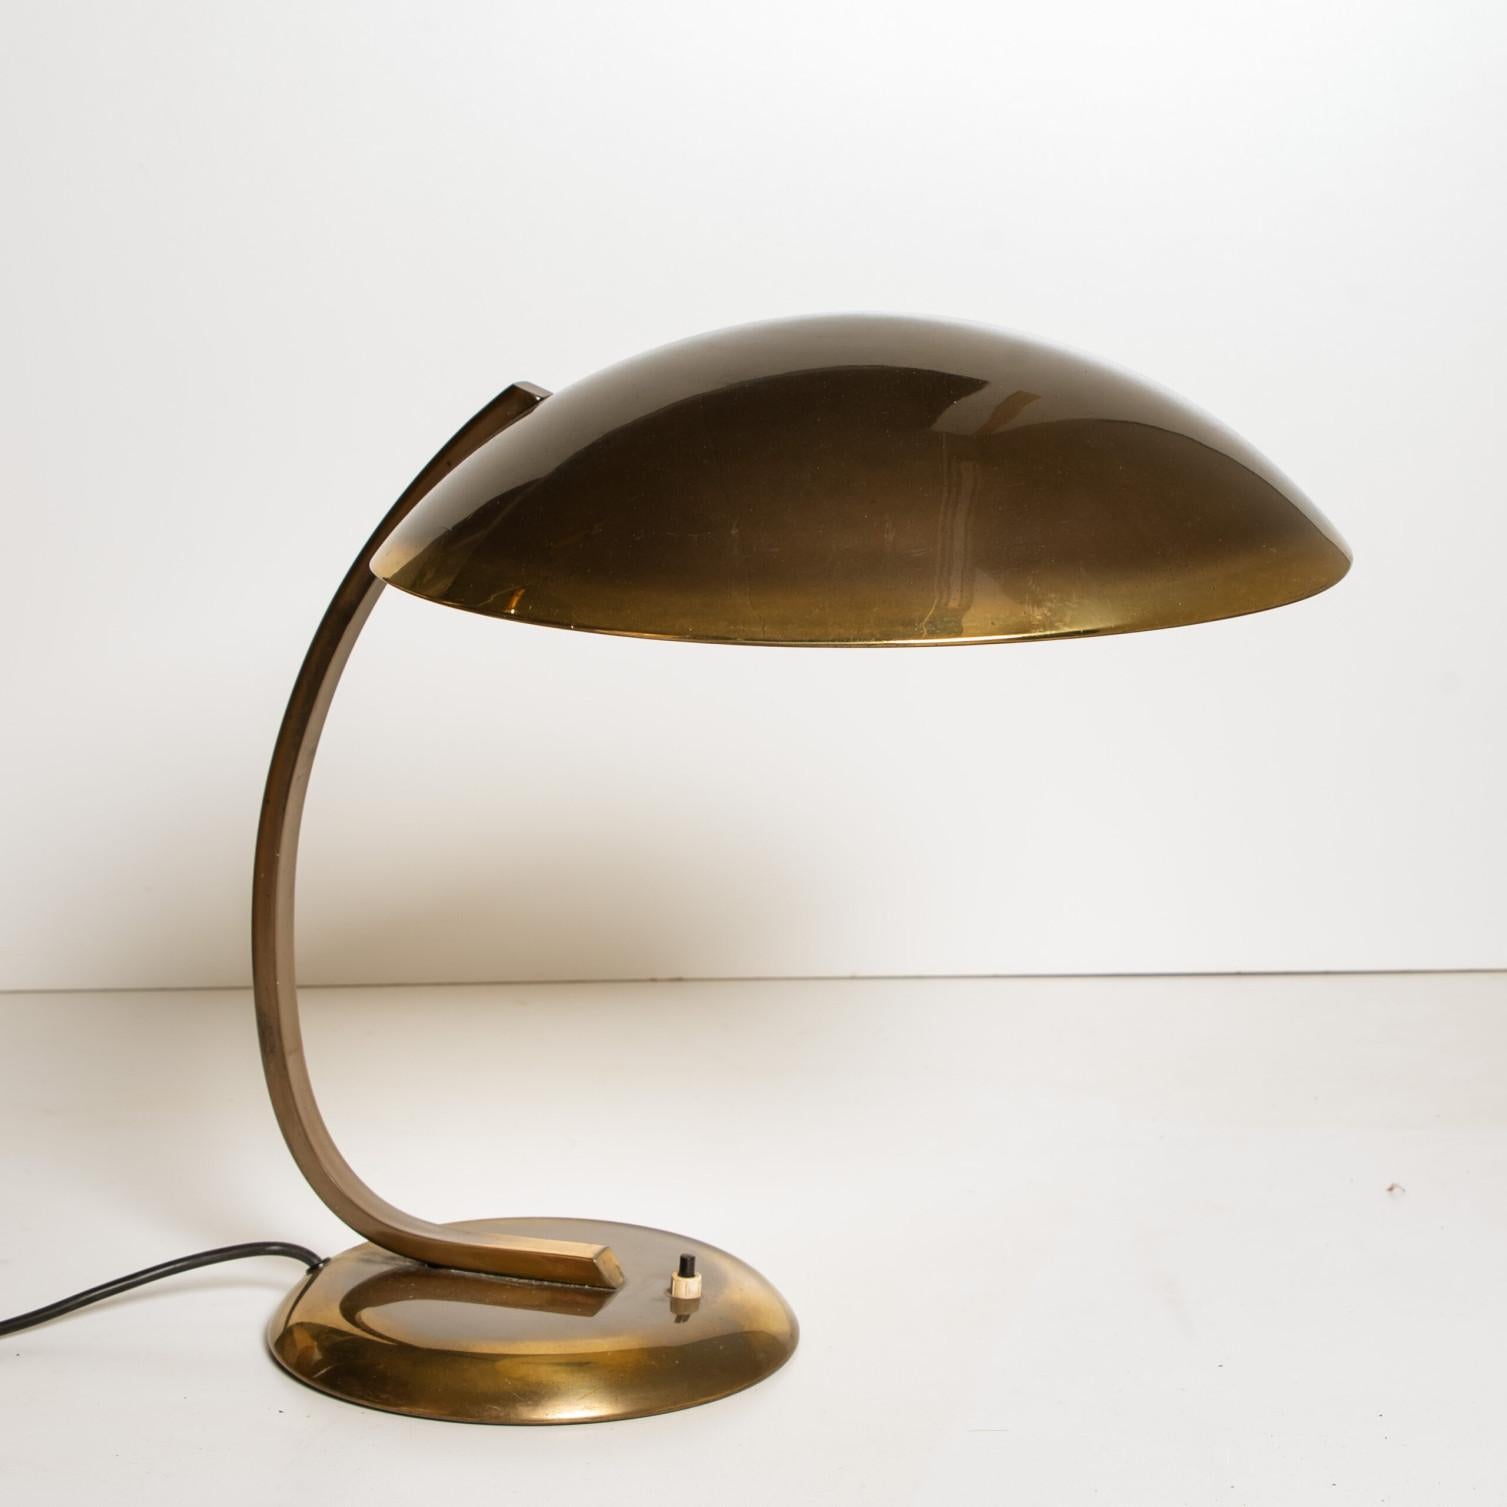 Beautiful large original Kaiser Idell fully brass desk lamp, made in Germany in the 1930s. Excellent clean and polished vintage condition.
The lamp works with an E27 Edison screw on bulb on 220V as well as 110V.

Heavy quality, in good vintage